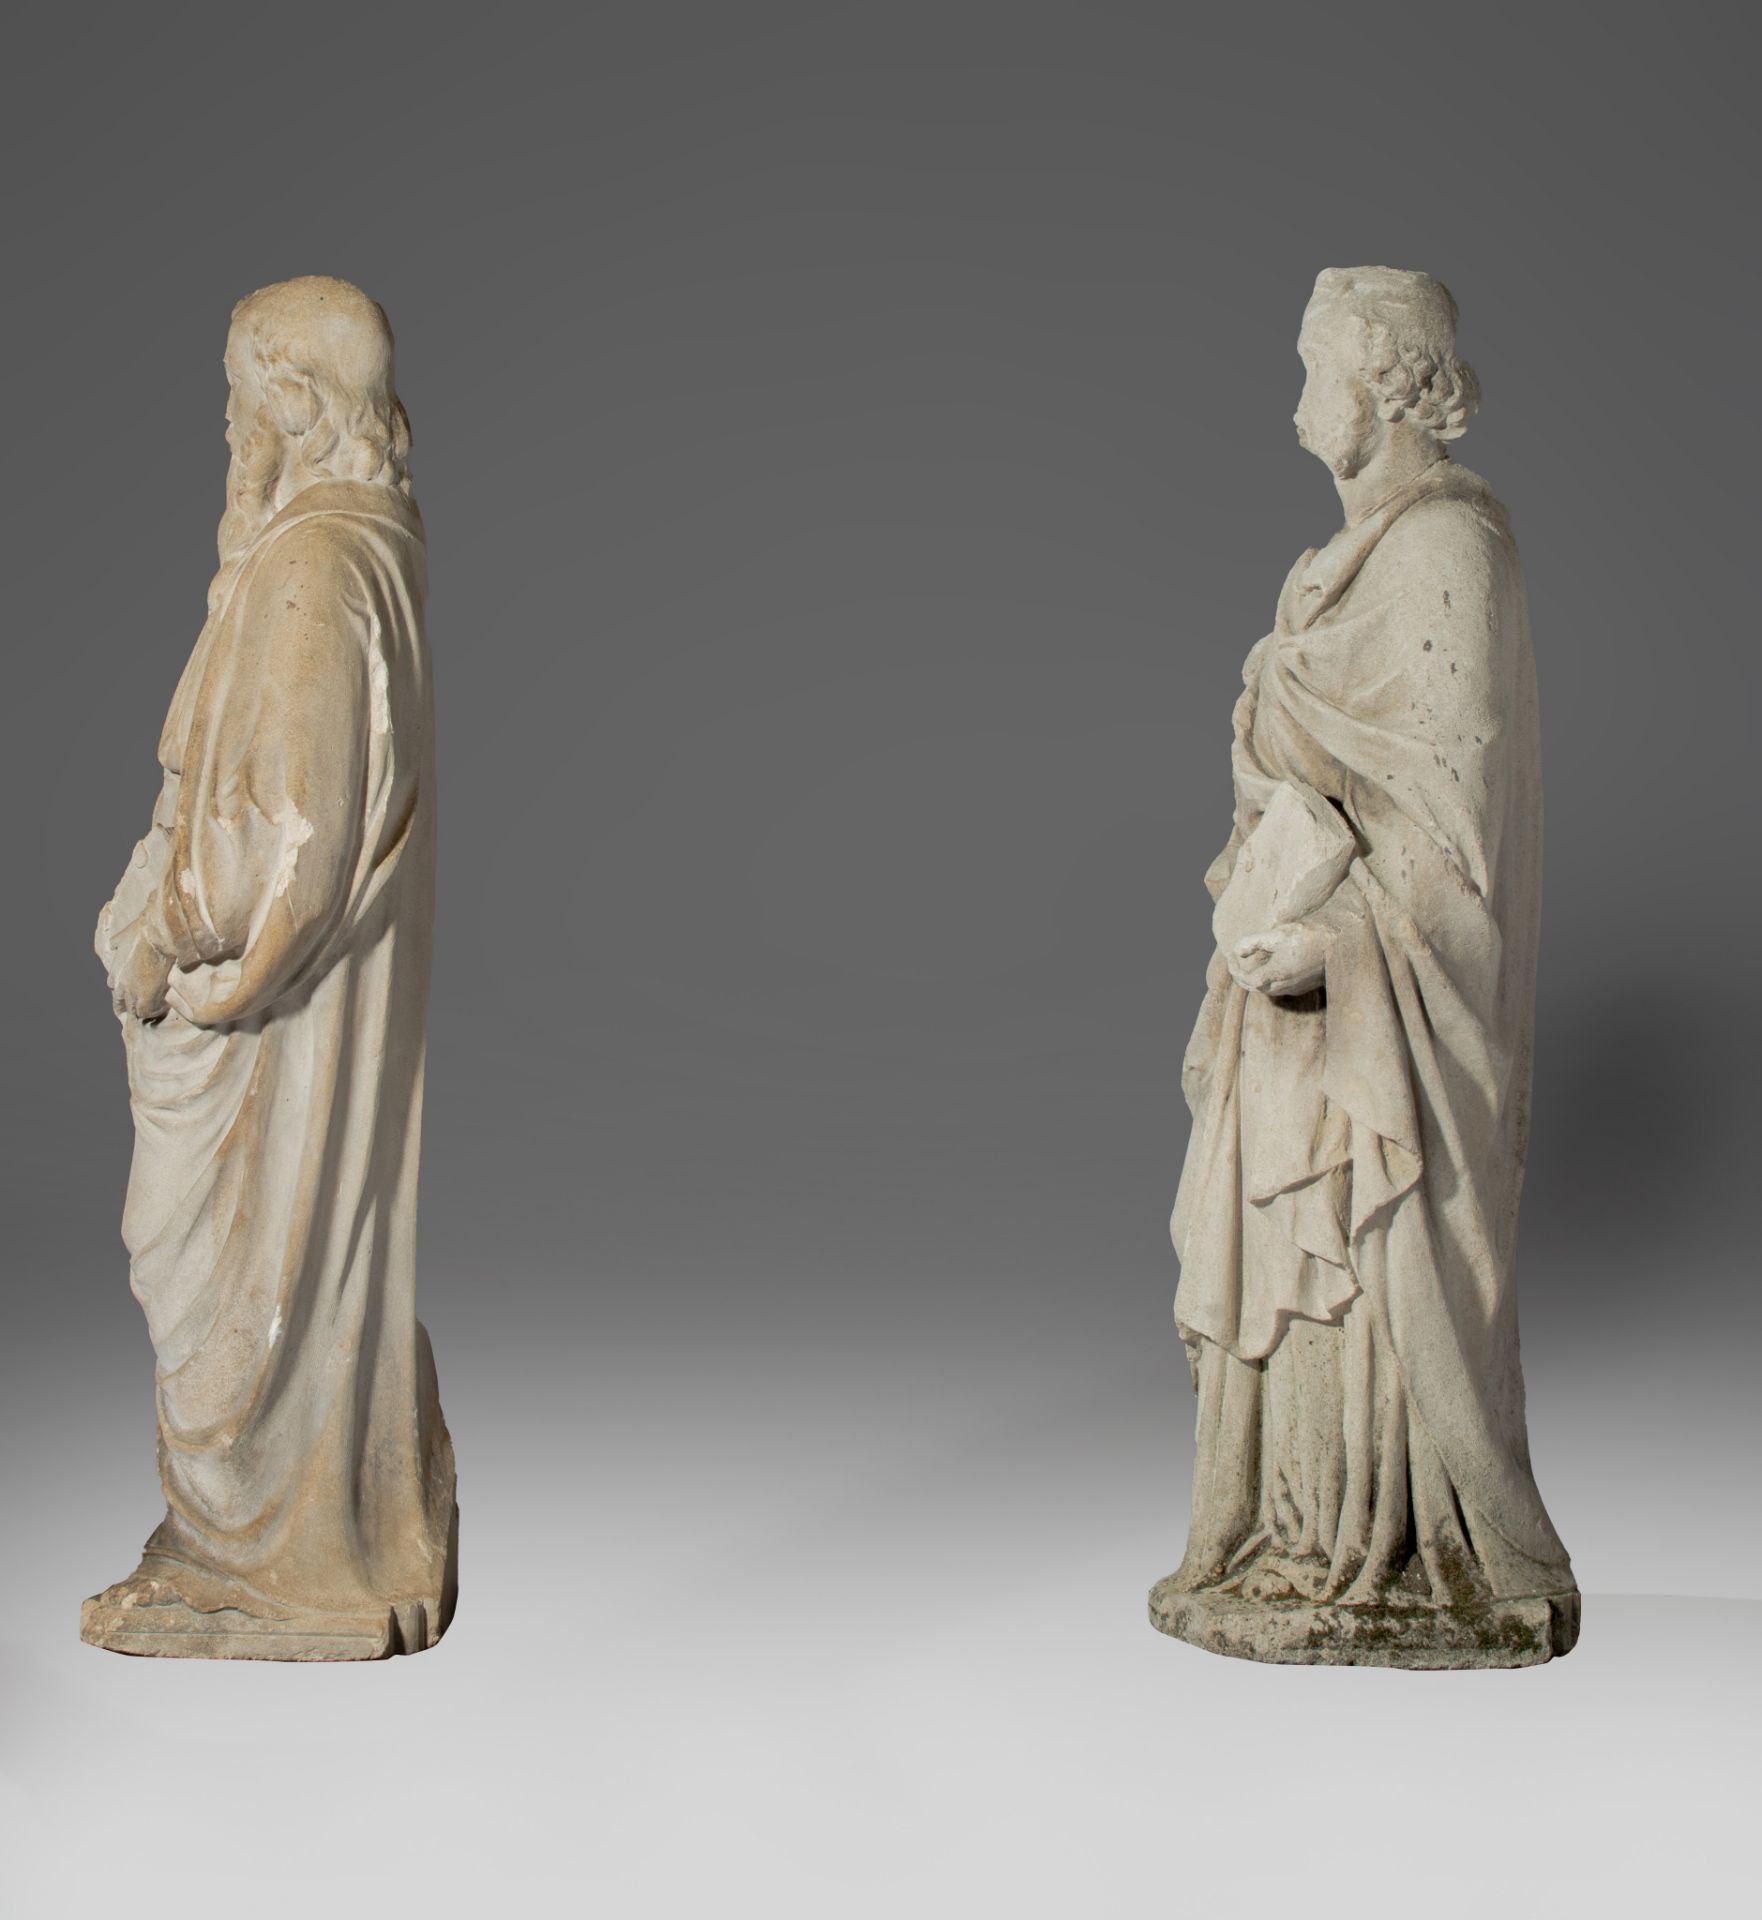 Two matching reconstituted stone sculptures of standing evangelists, H 83 - 85 cm - Image 4 of 11